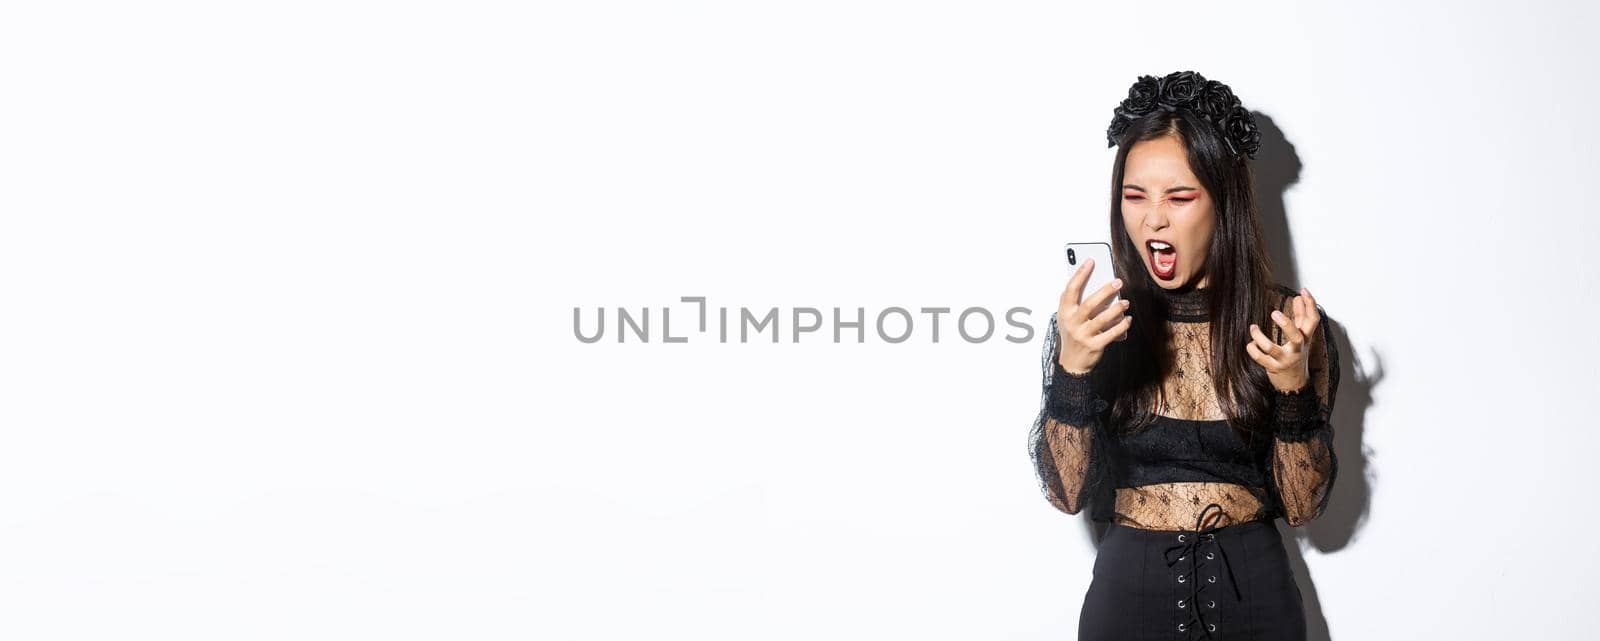 Portrait of angry asian woman in halloween costume looking mad, shouting at mobile phone and grimacing furious, standing over white background.